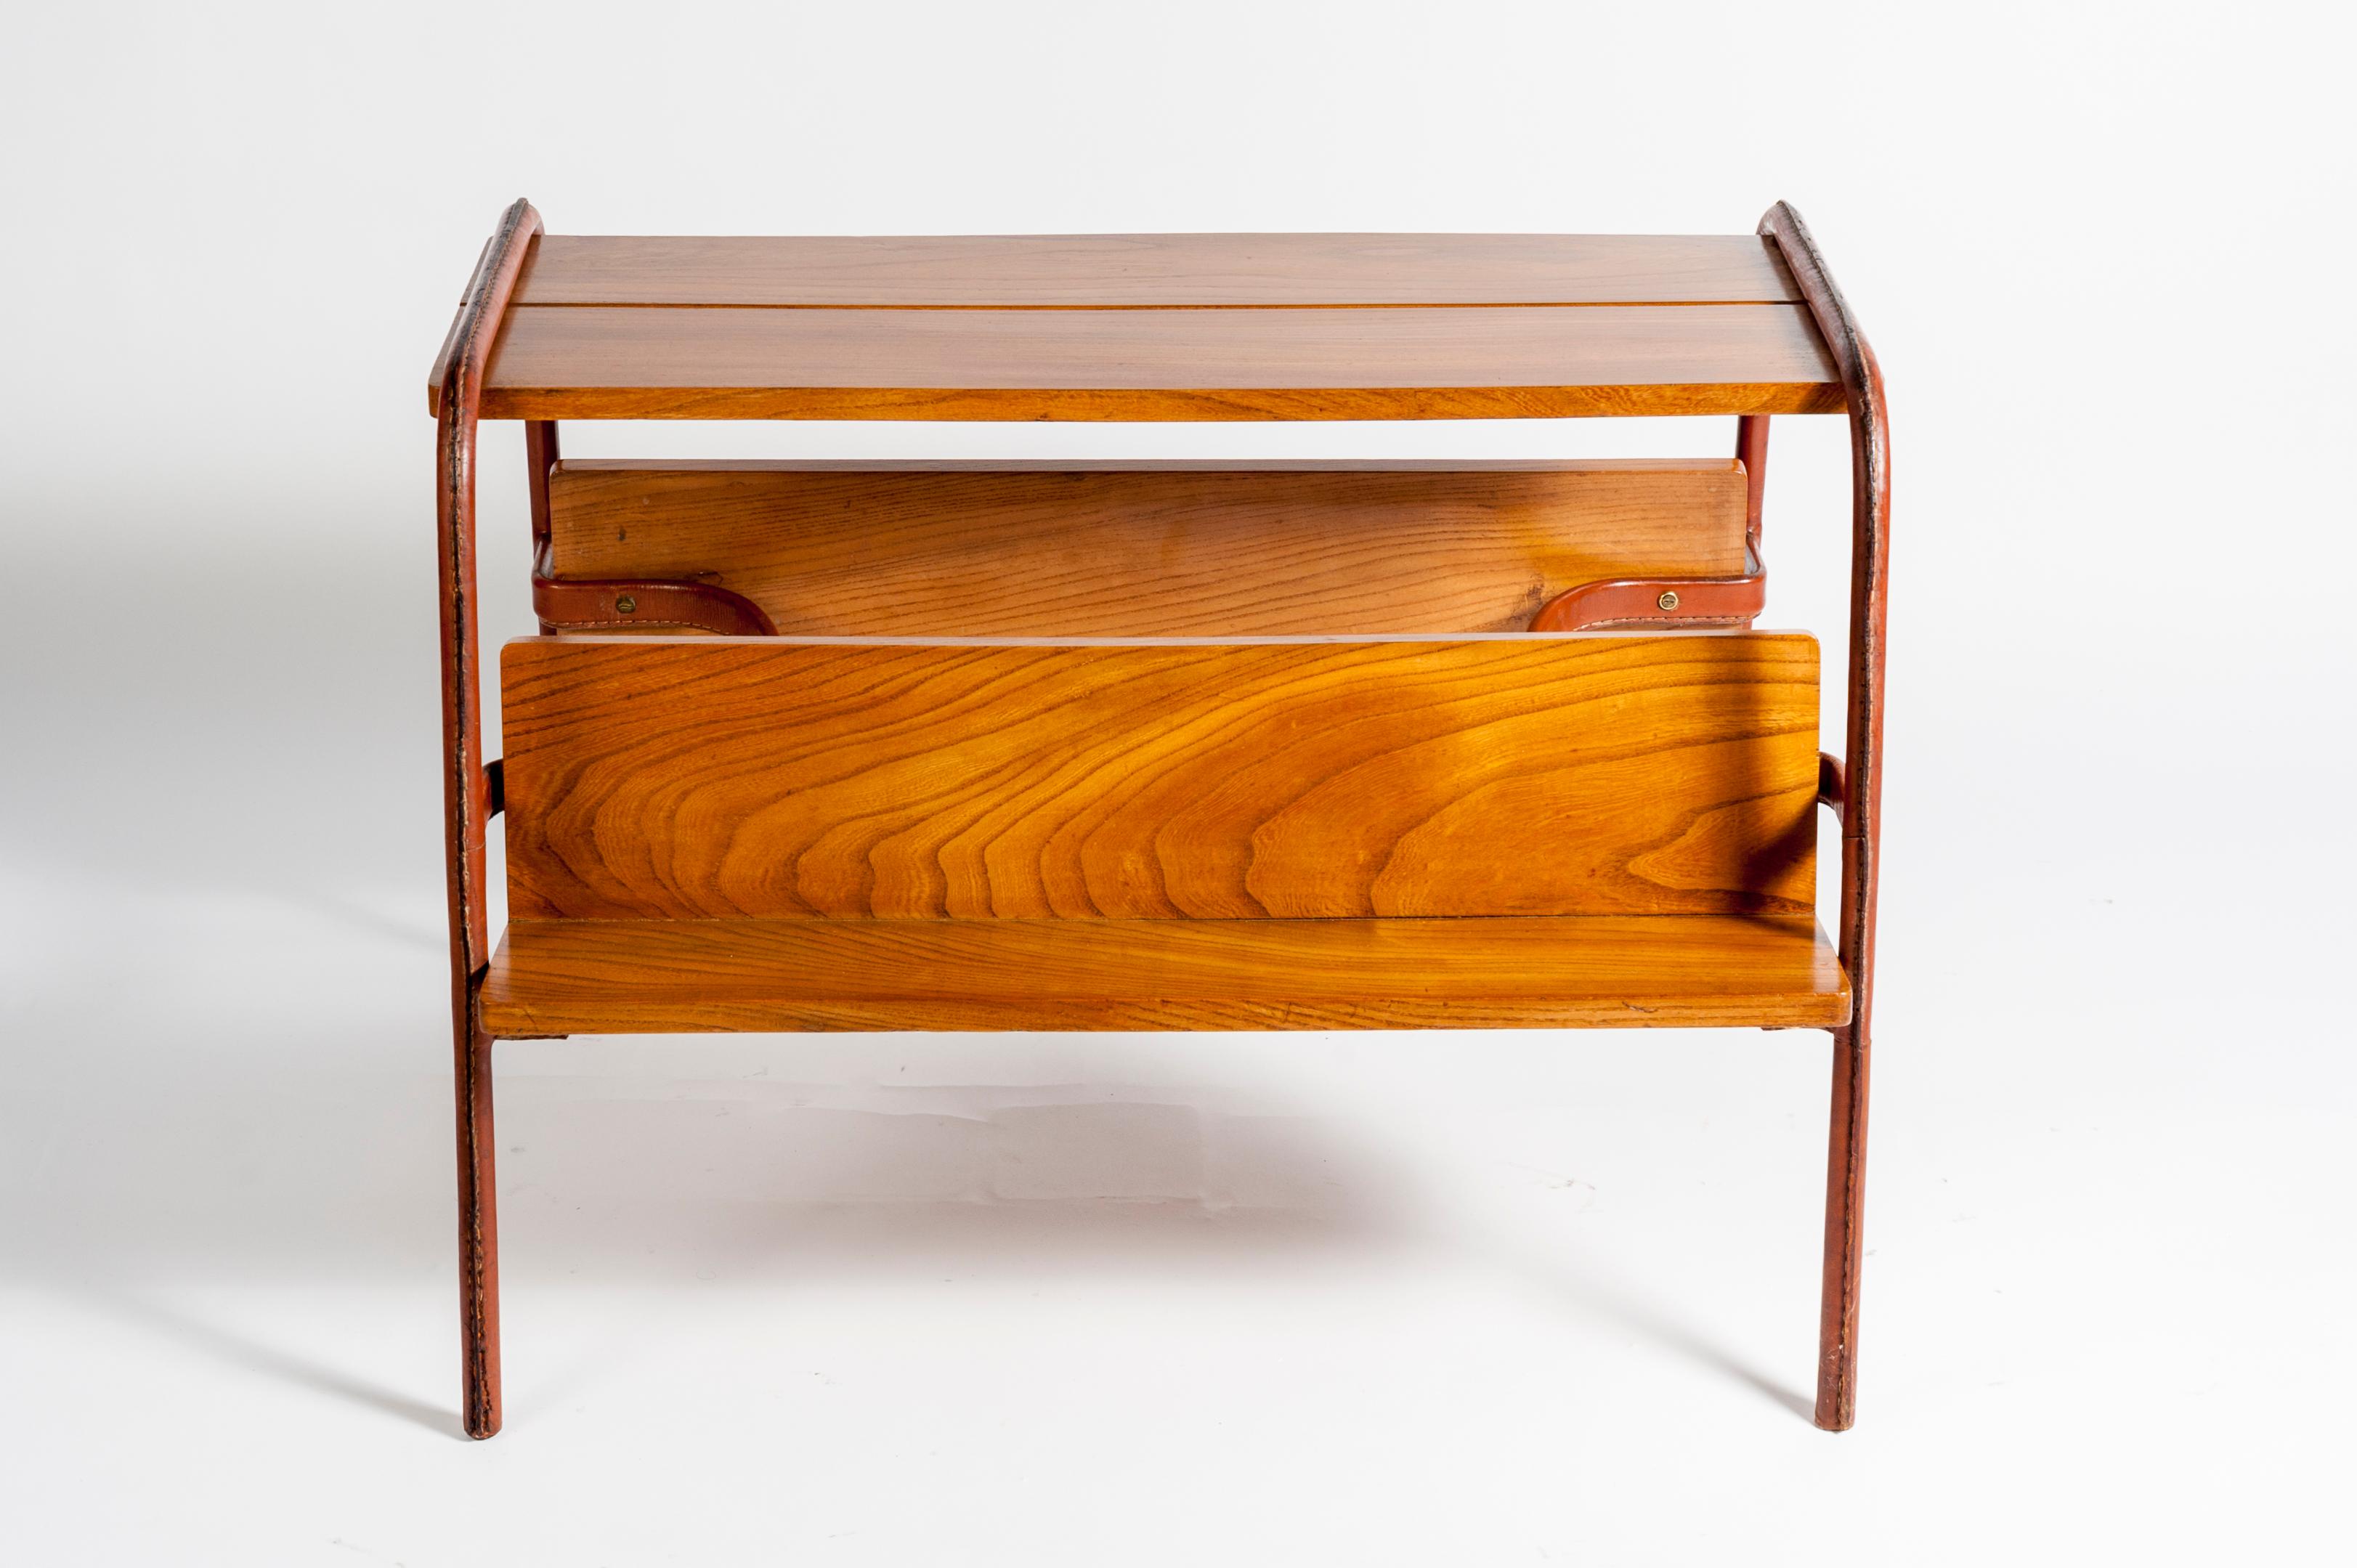 Stitched Leather Table by Jacques Adnet 1